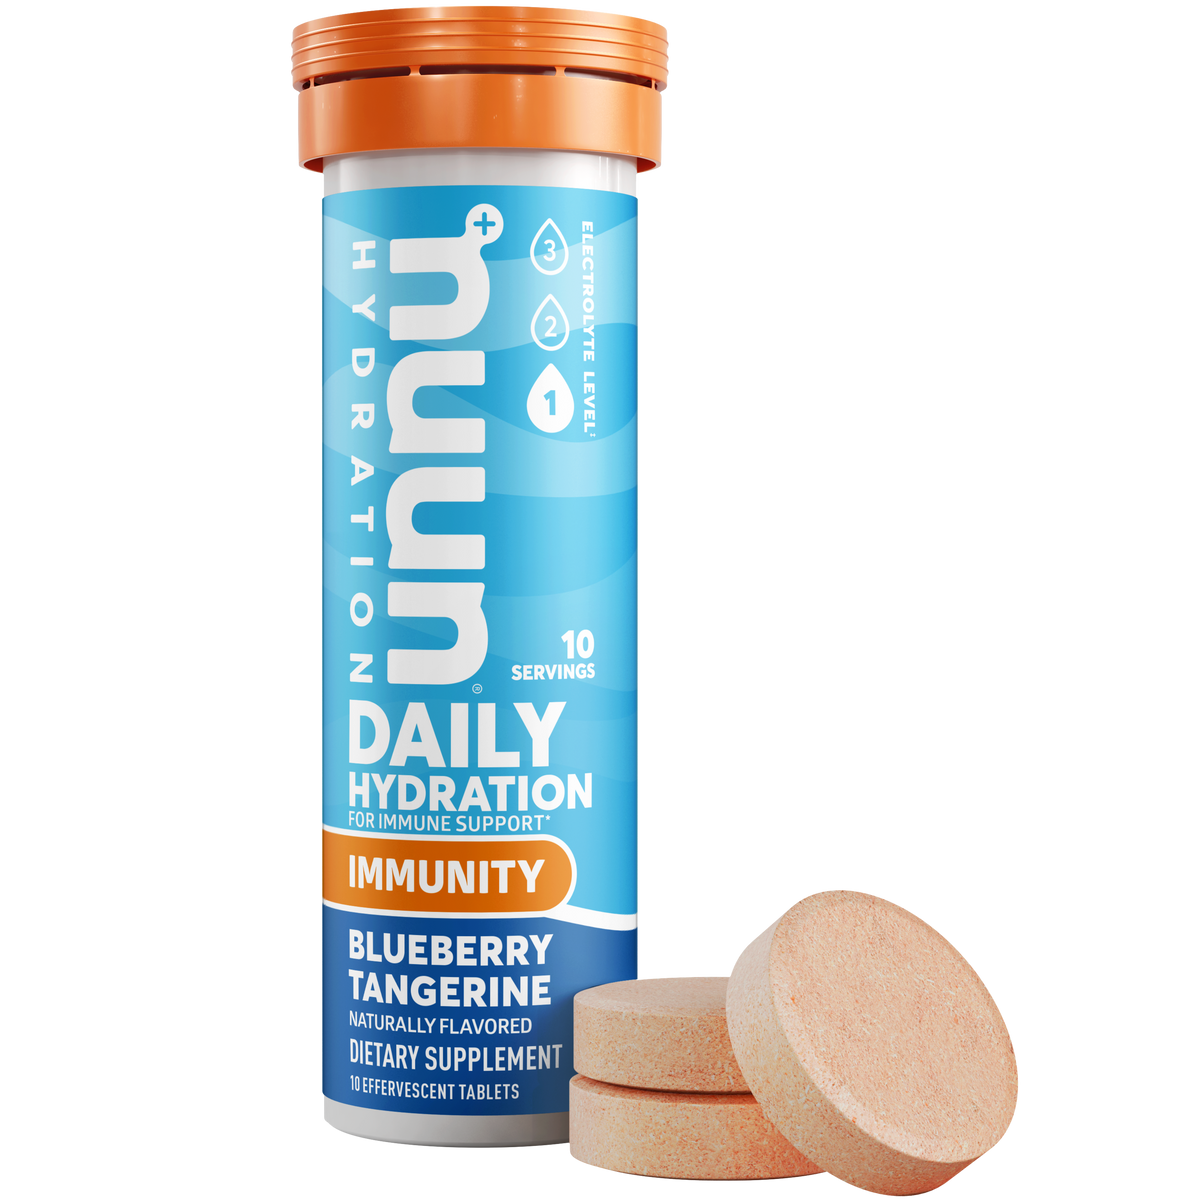 Is Cold Water Bad For You? – Nuun Hydration